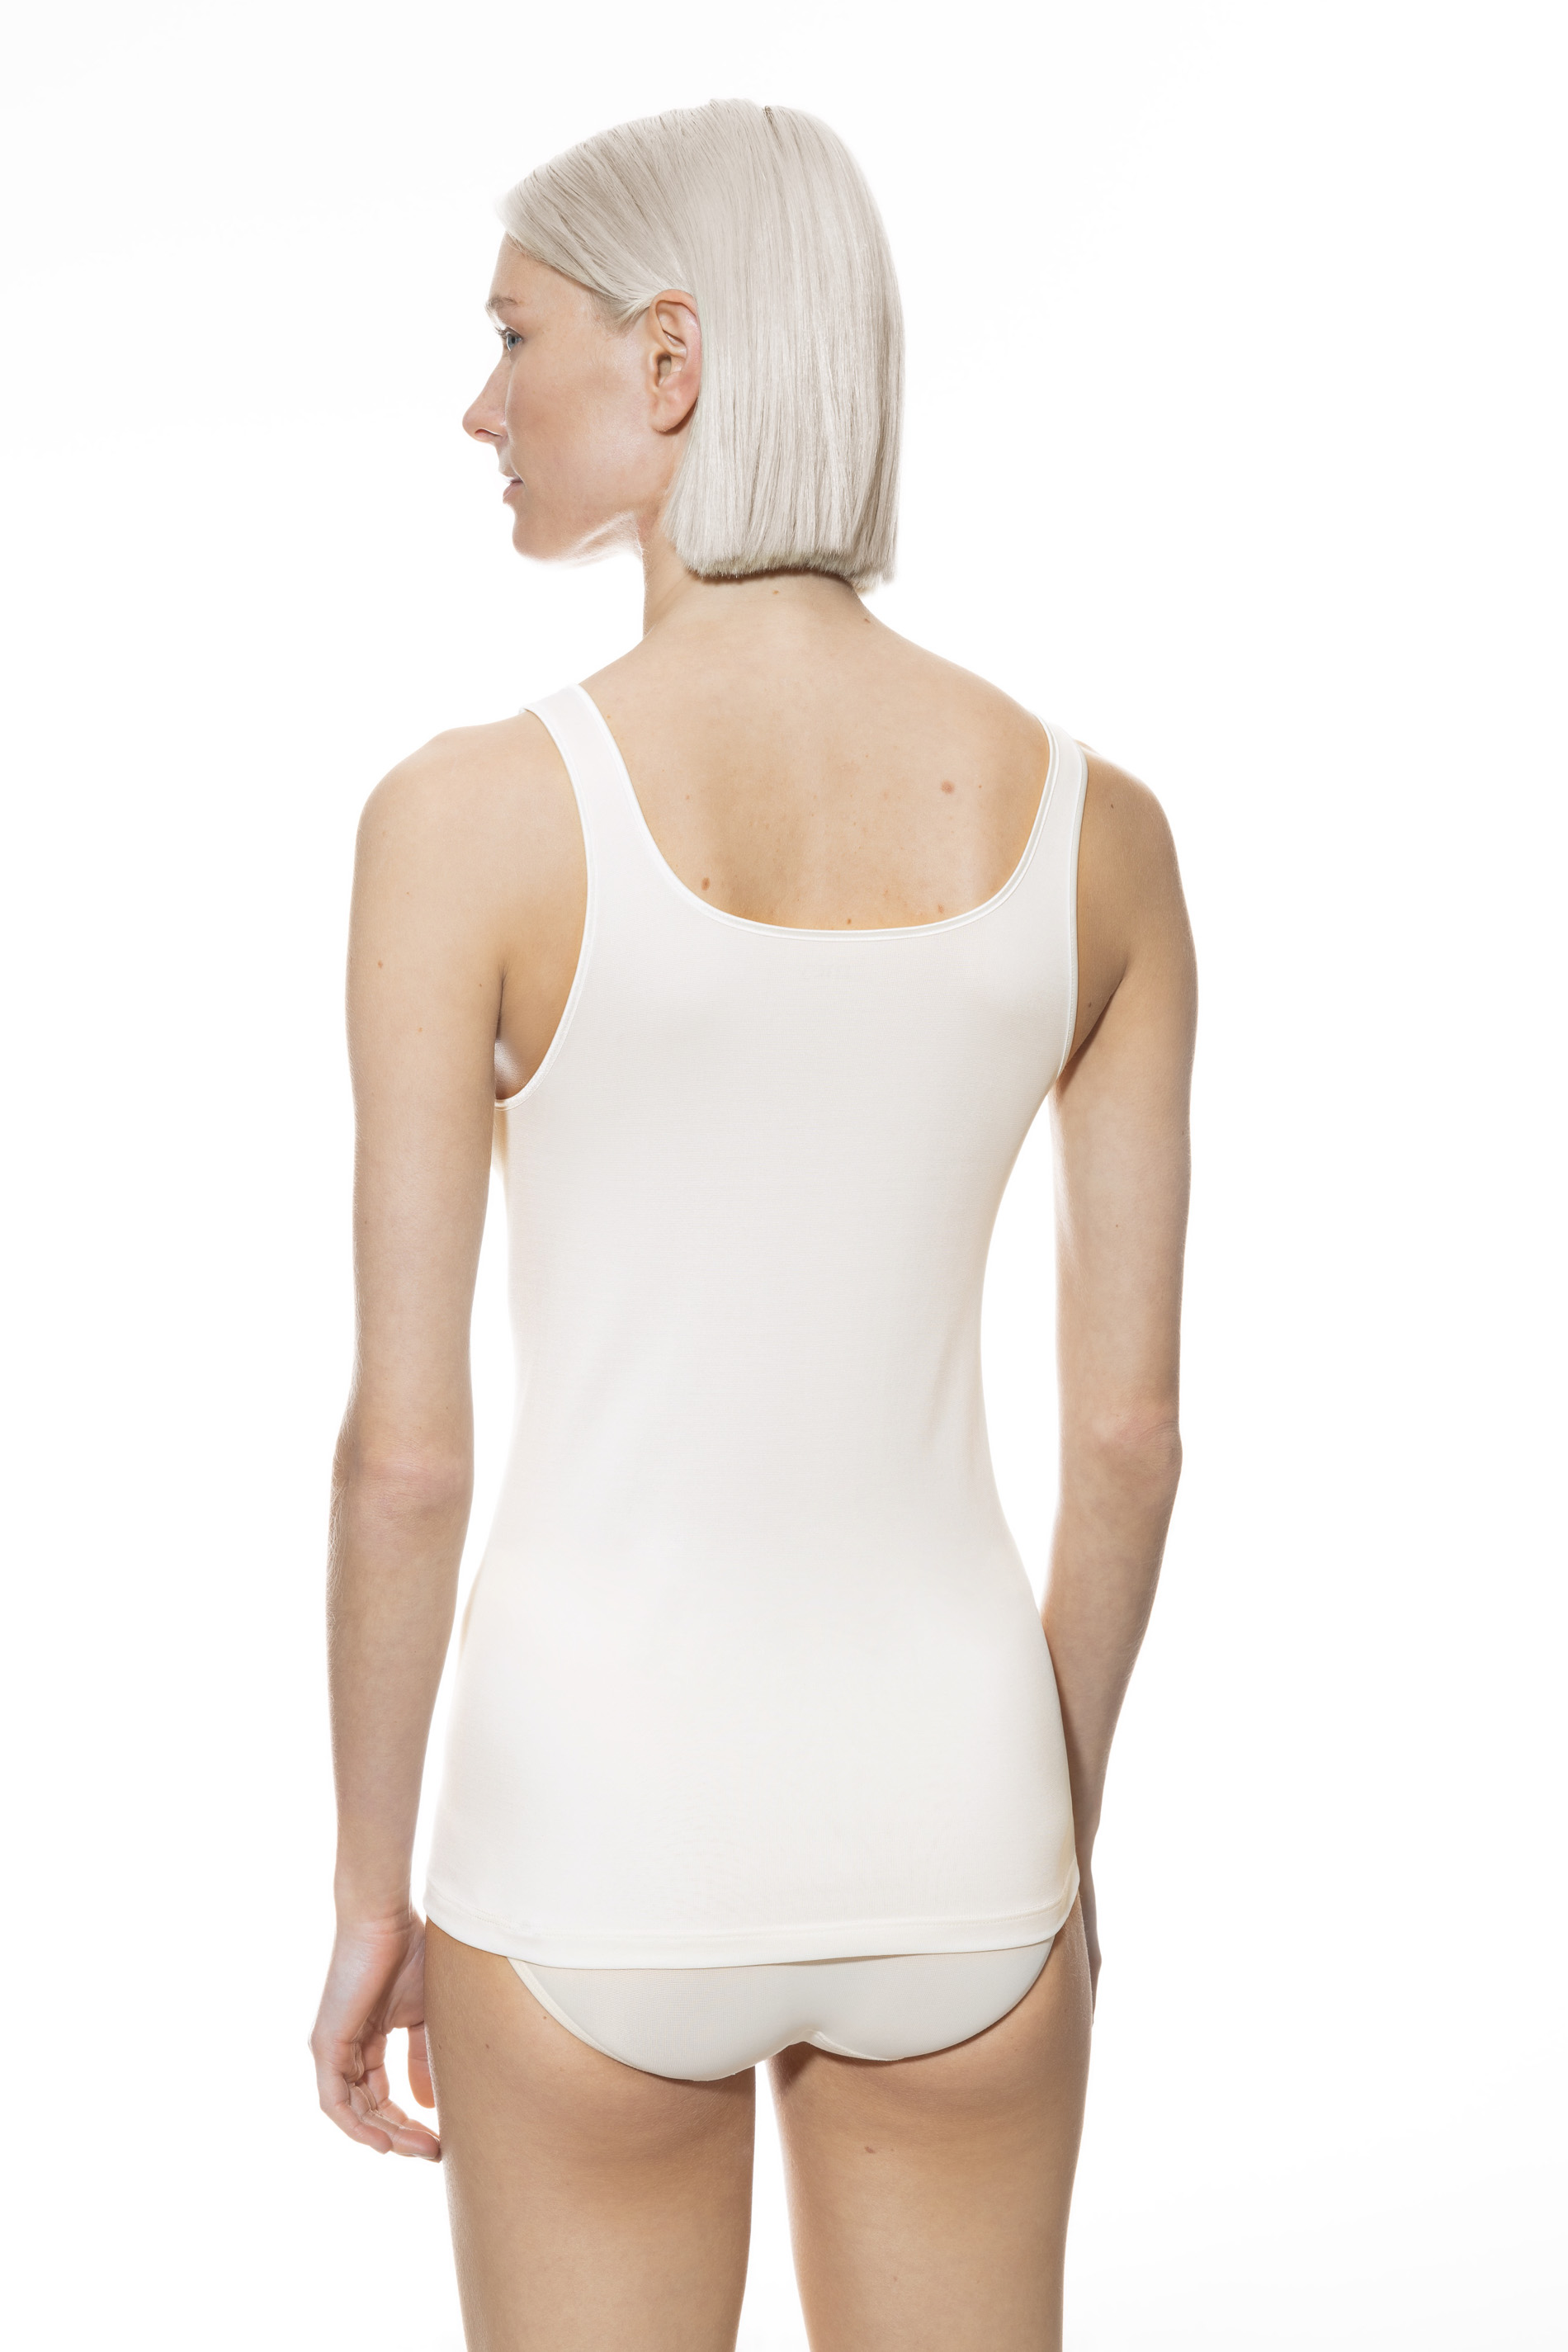 Strap top for women Champagner Serie Emotion Rear View | mey®